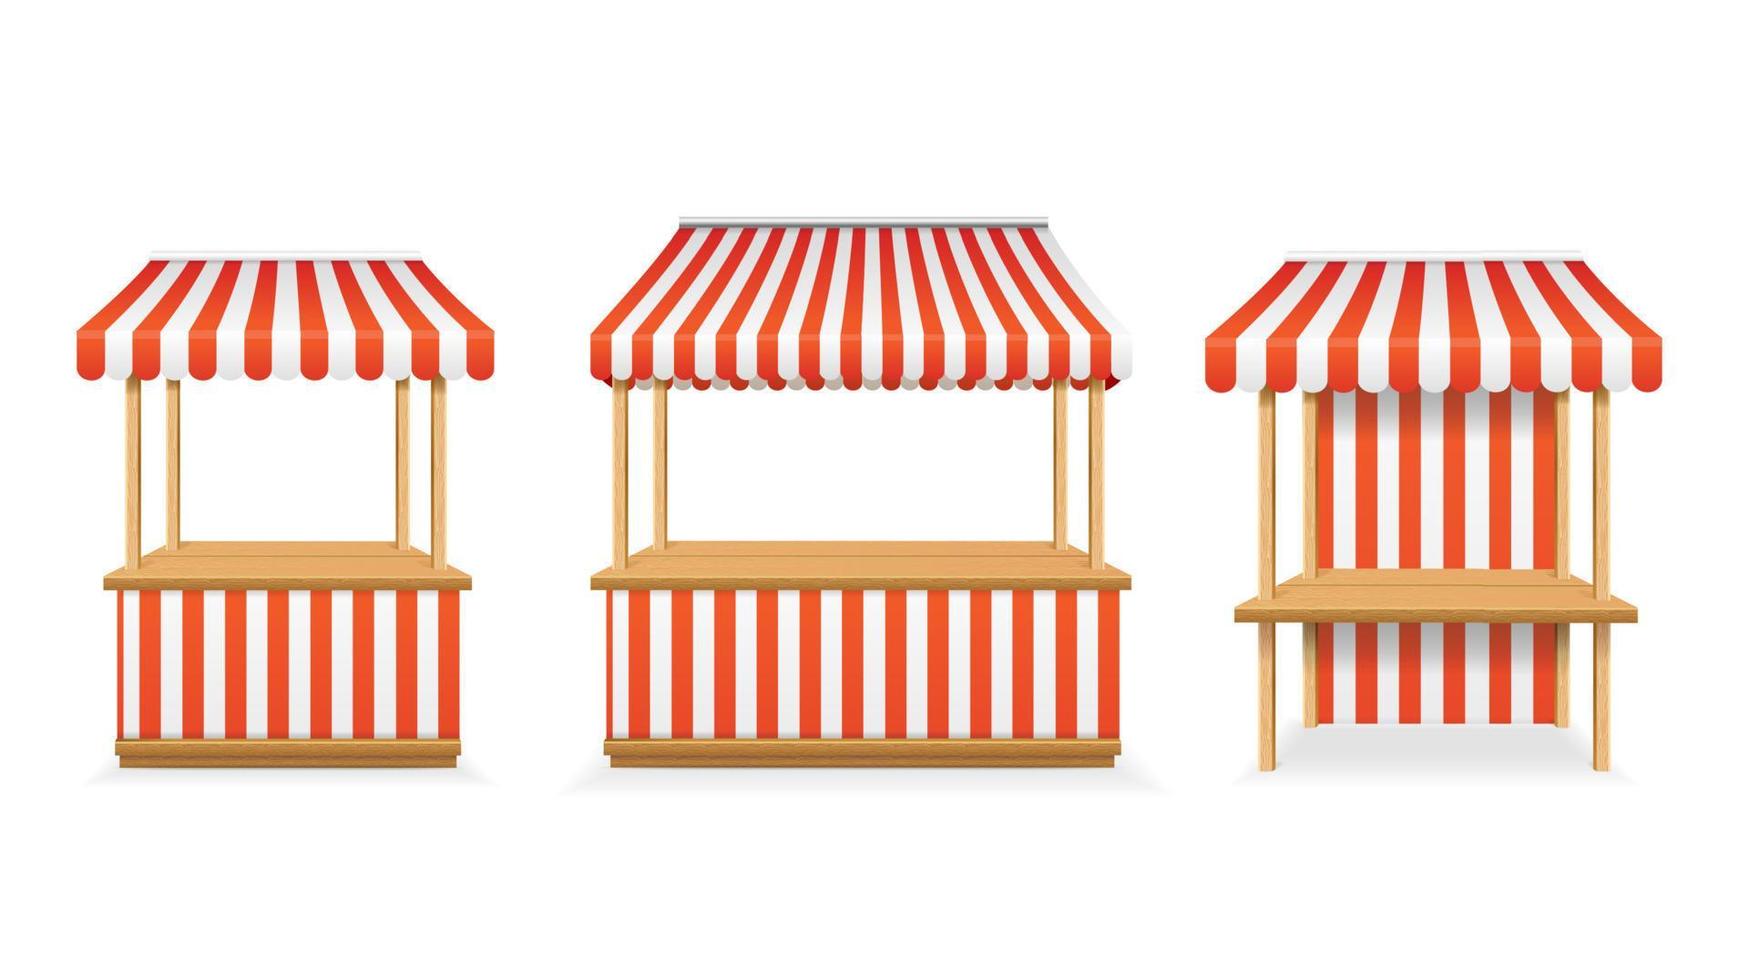 Realistic Detailed 3d Different Street Food Market Set. Vector